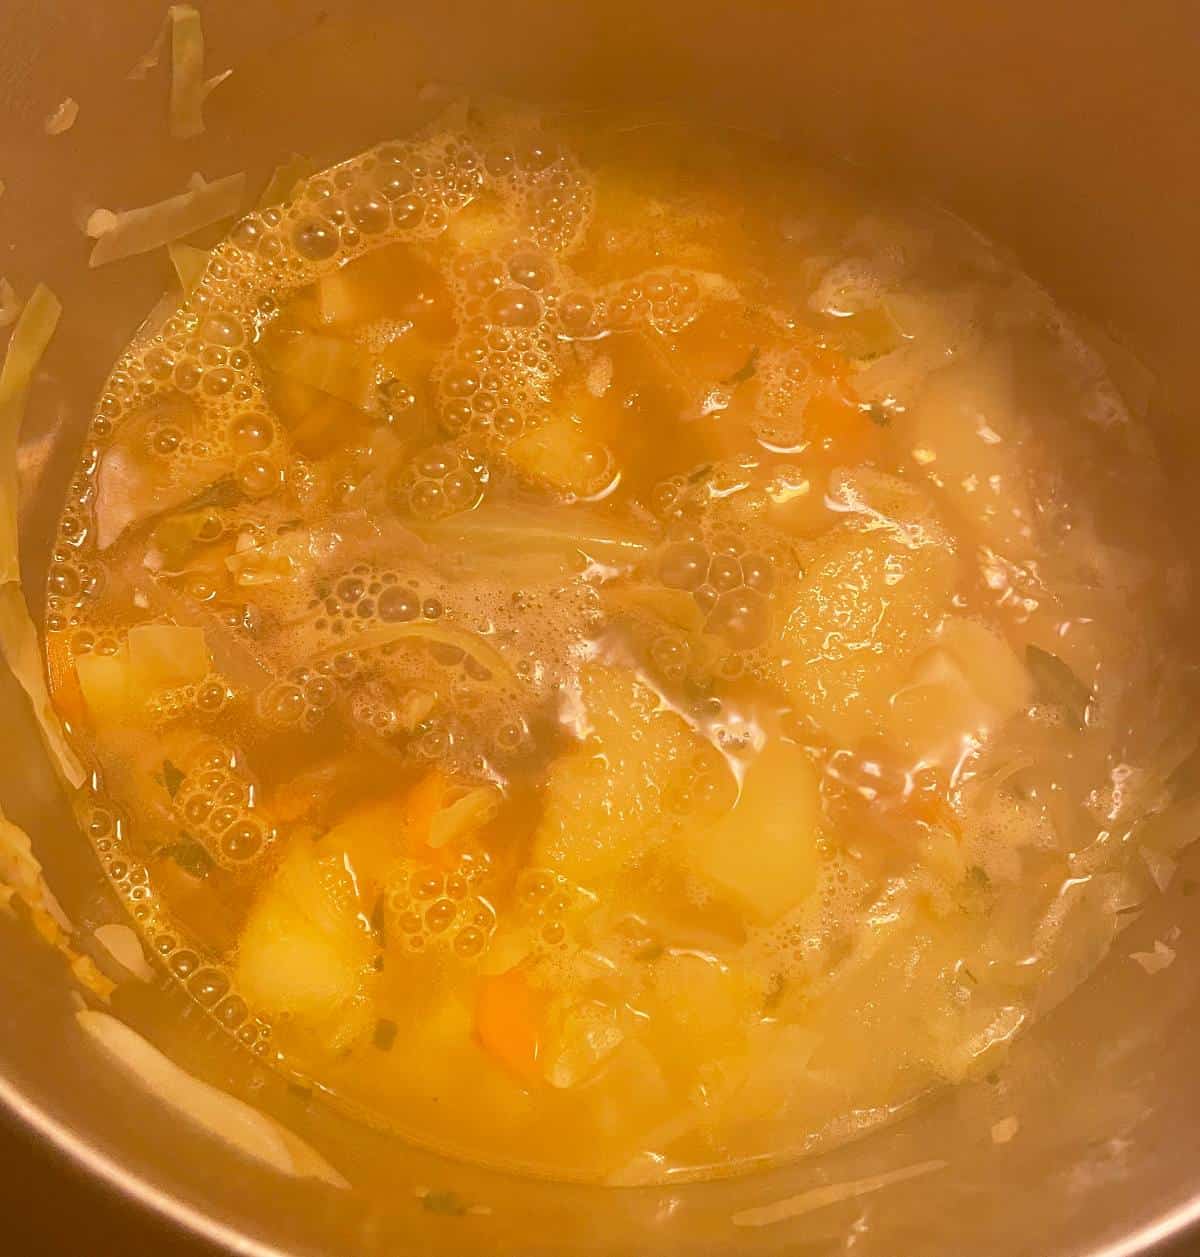 potato soup simmering after adding stout to the pot, making it darker in color.